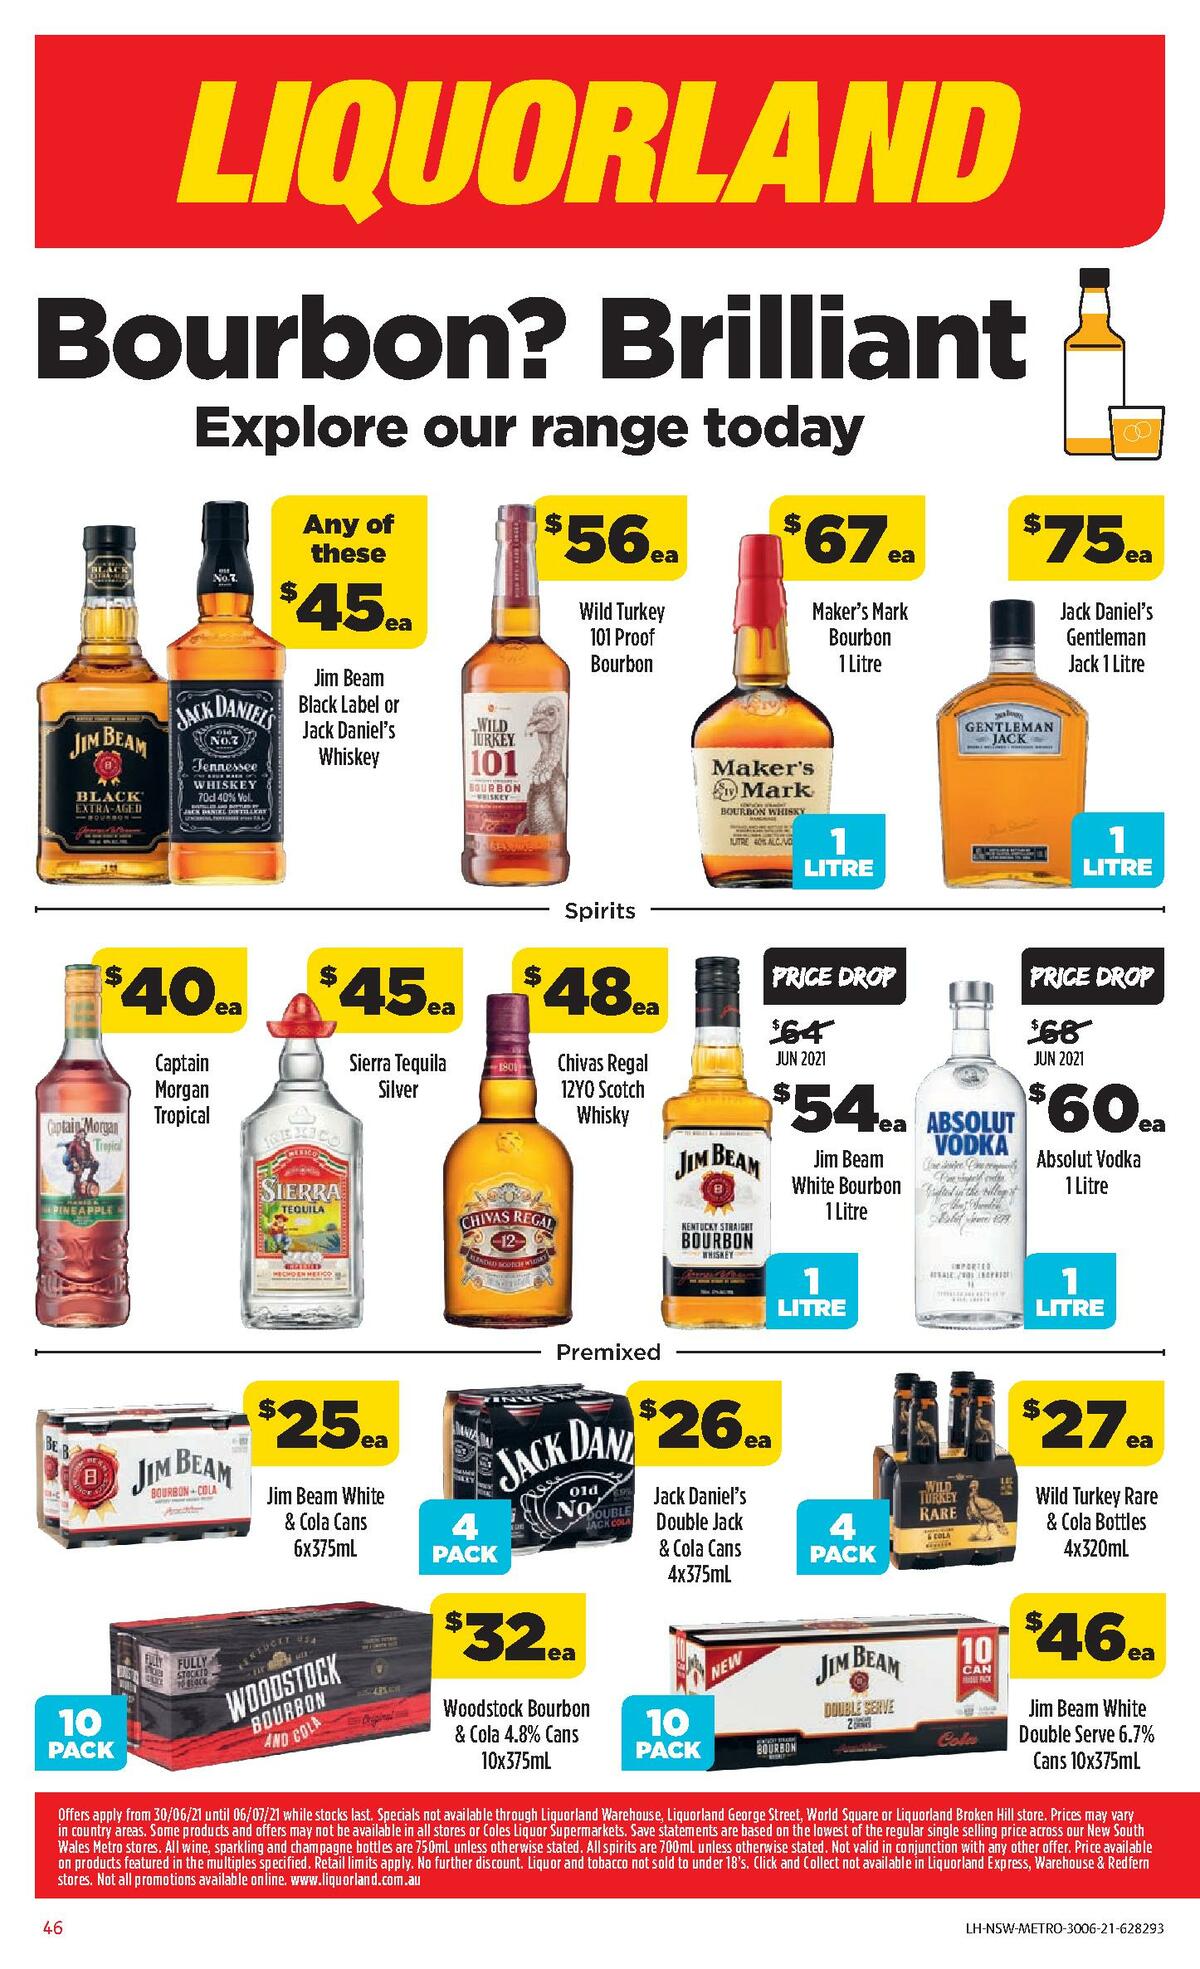 Coles Catalogues from 30 June